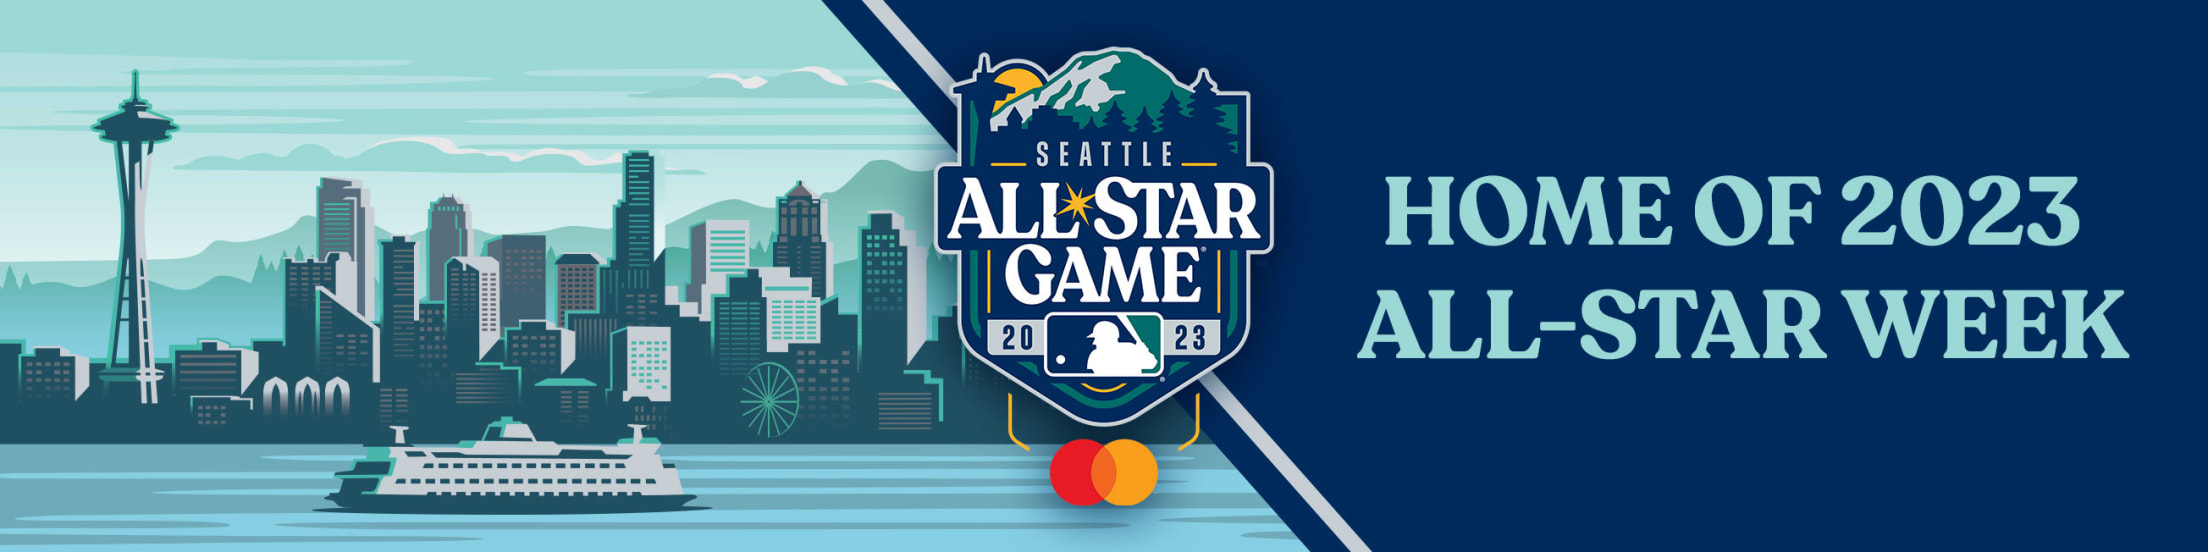 2023 MLB All-Star Futures Game FAQ important information